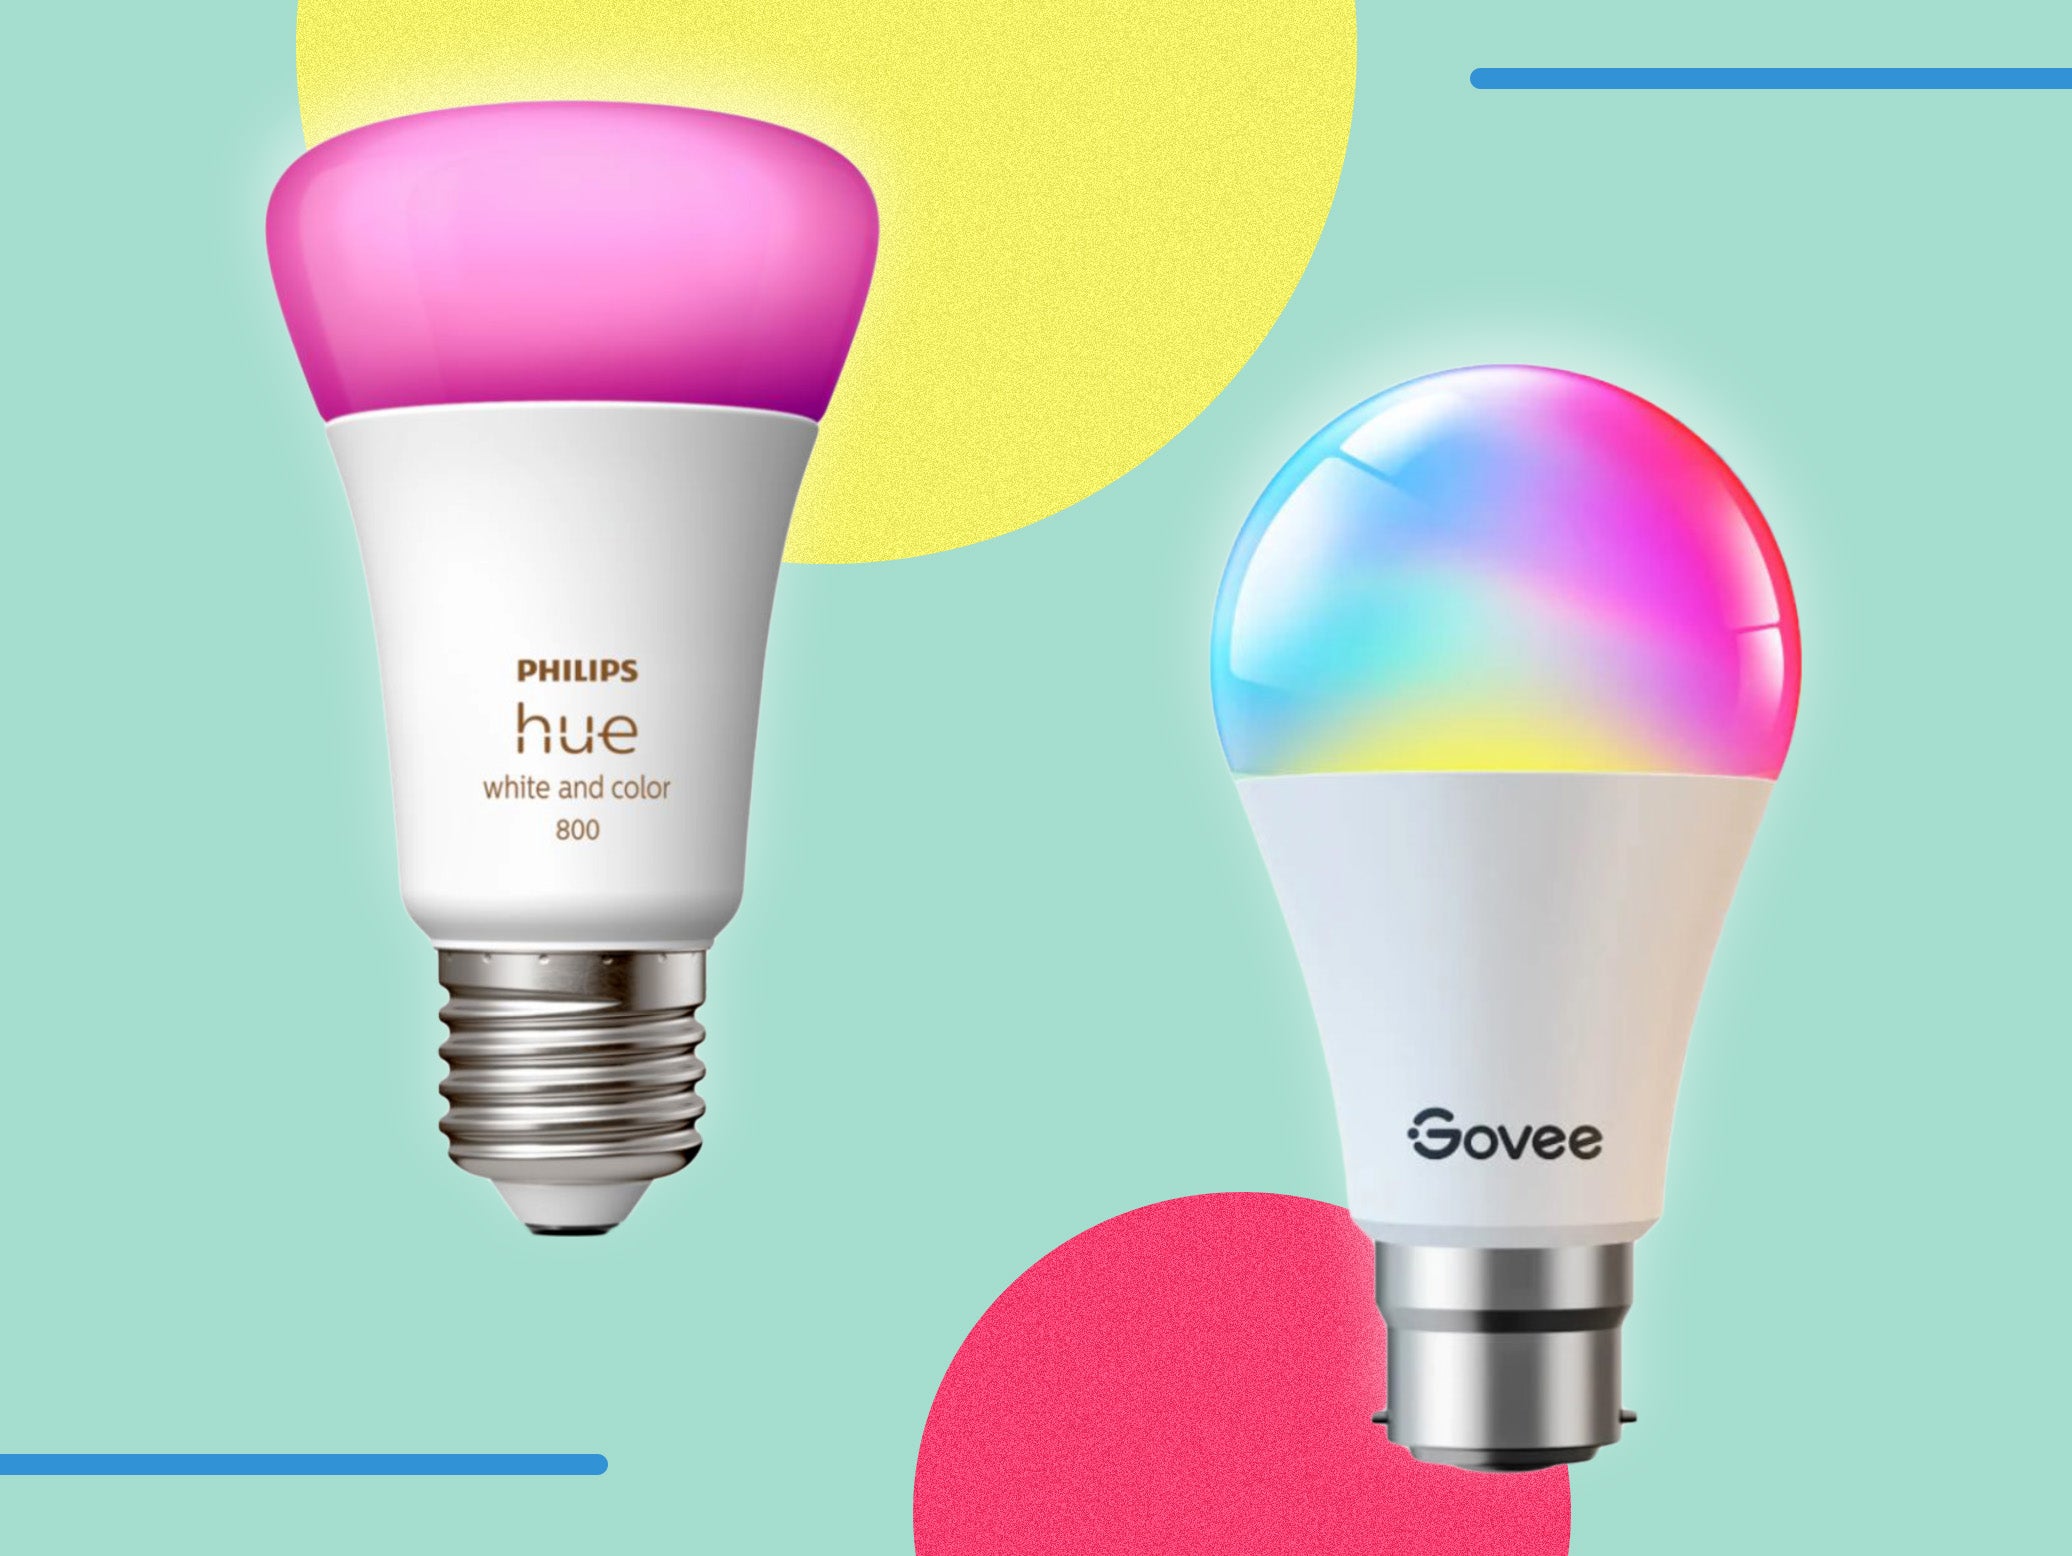 Phillips hue vs Govee: Which is the smart lighting system for your home? | The Independent